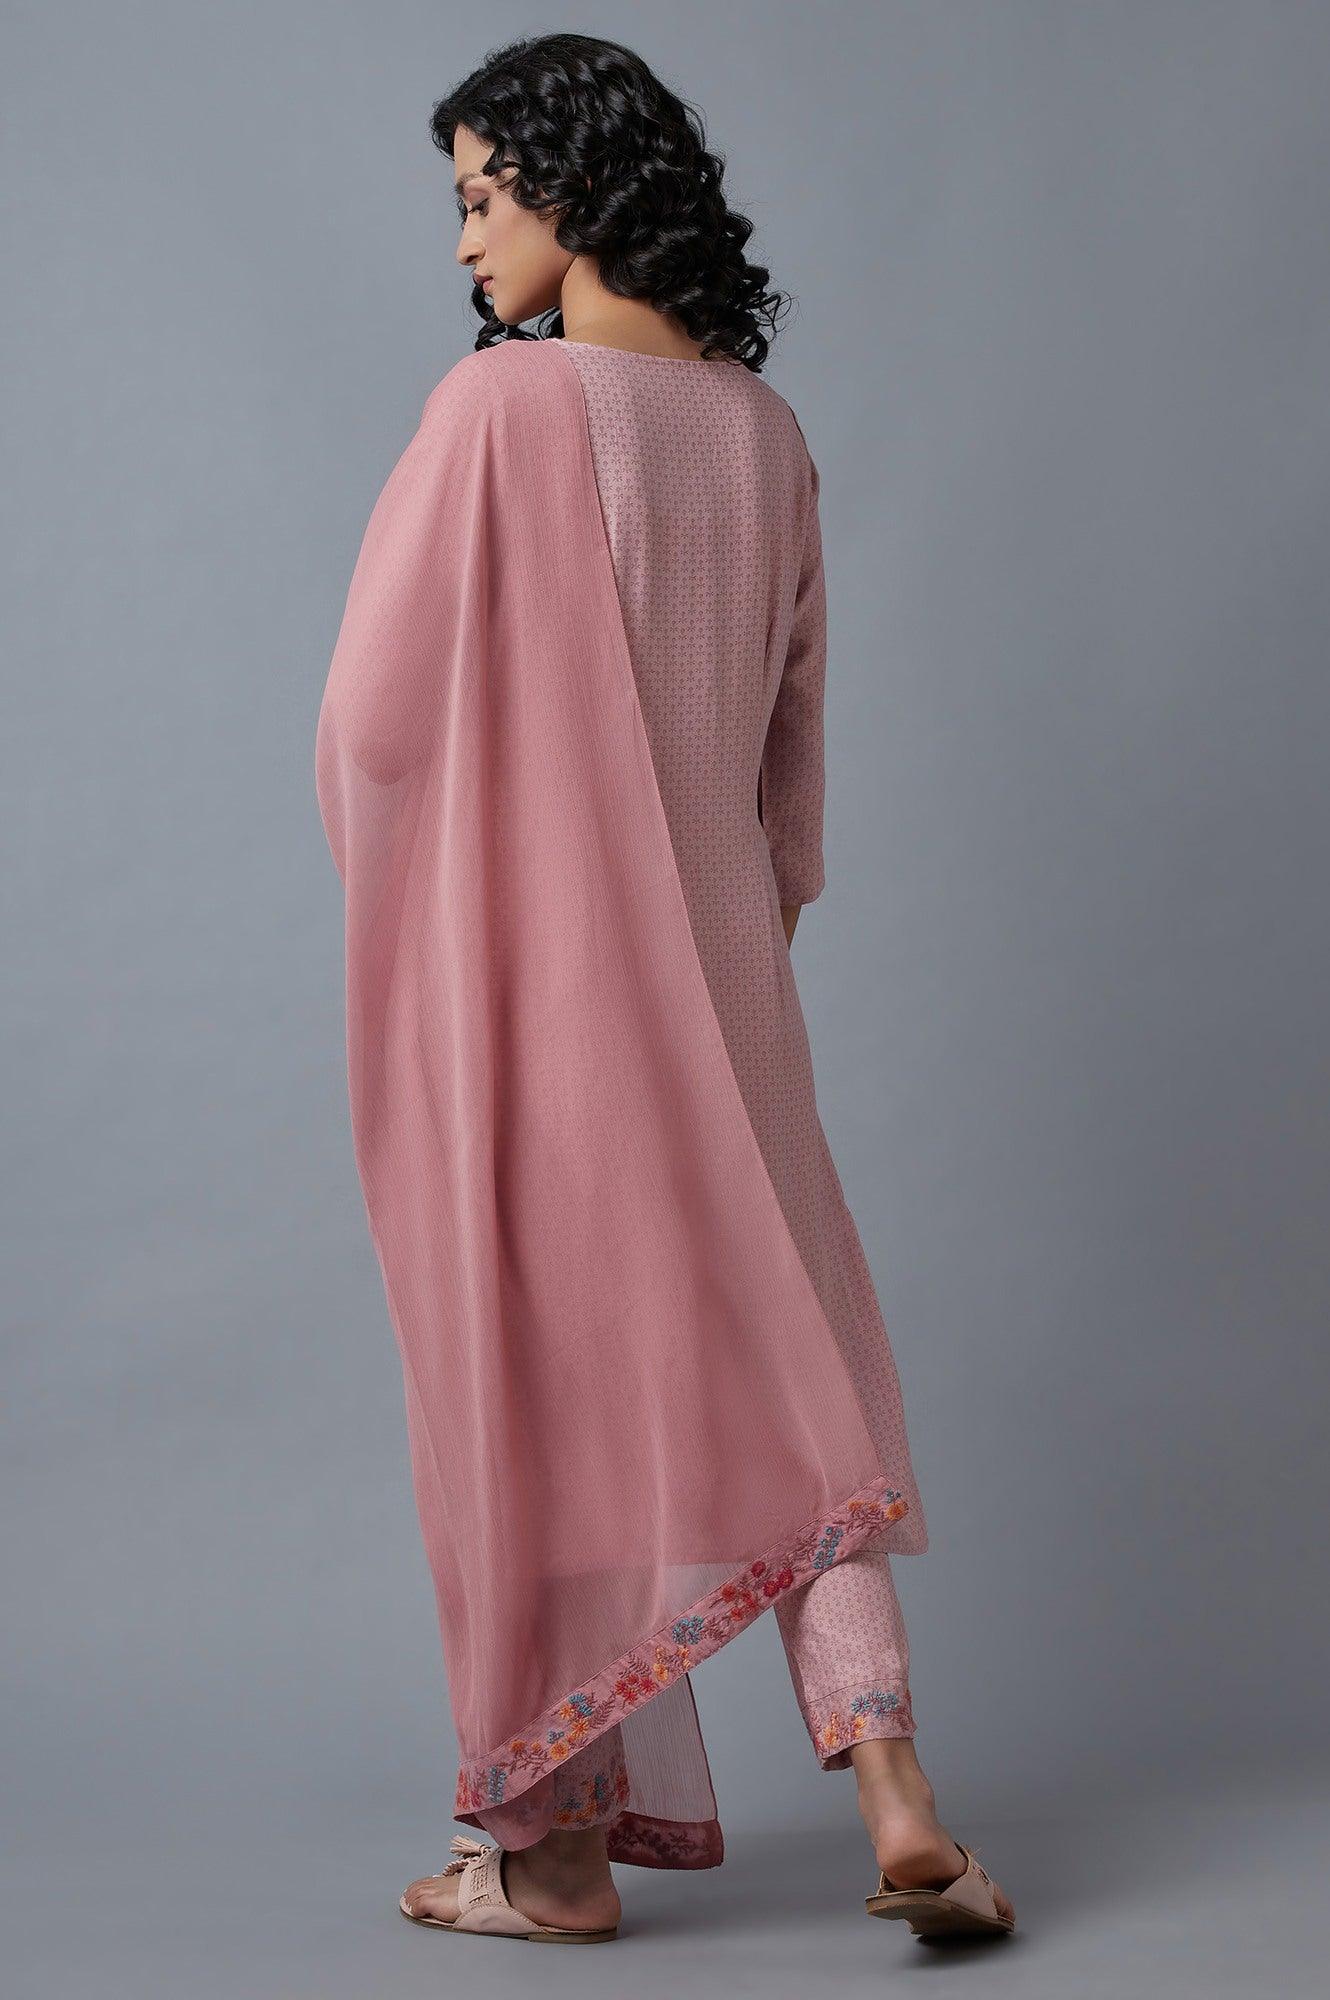 Light Pink Embroidered kurta In Round Neck With Straight Pants And Chiffon Dupatta - wforwoman